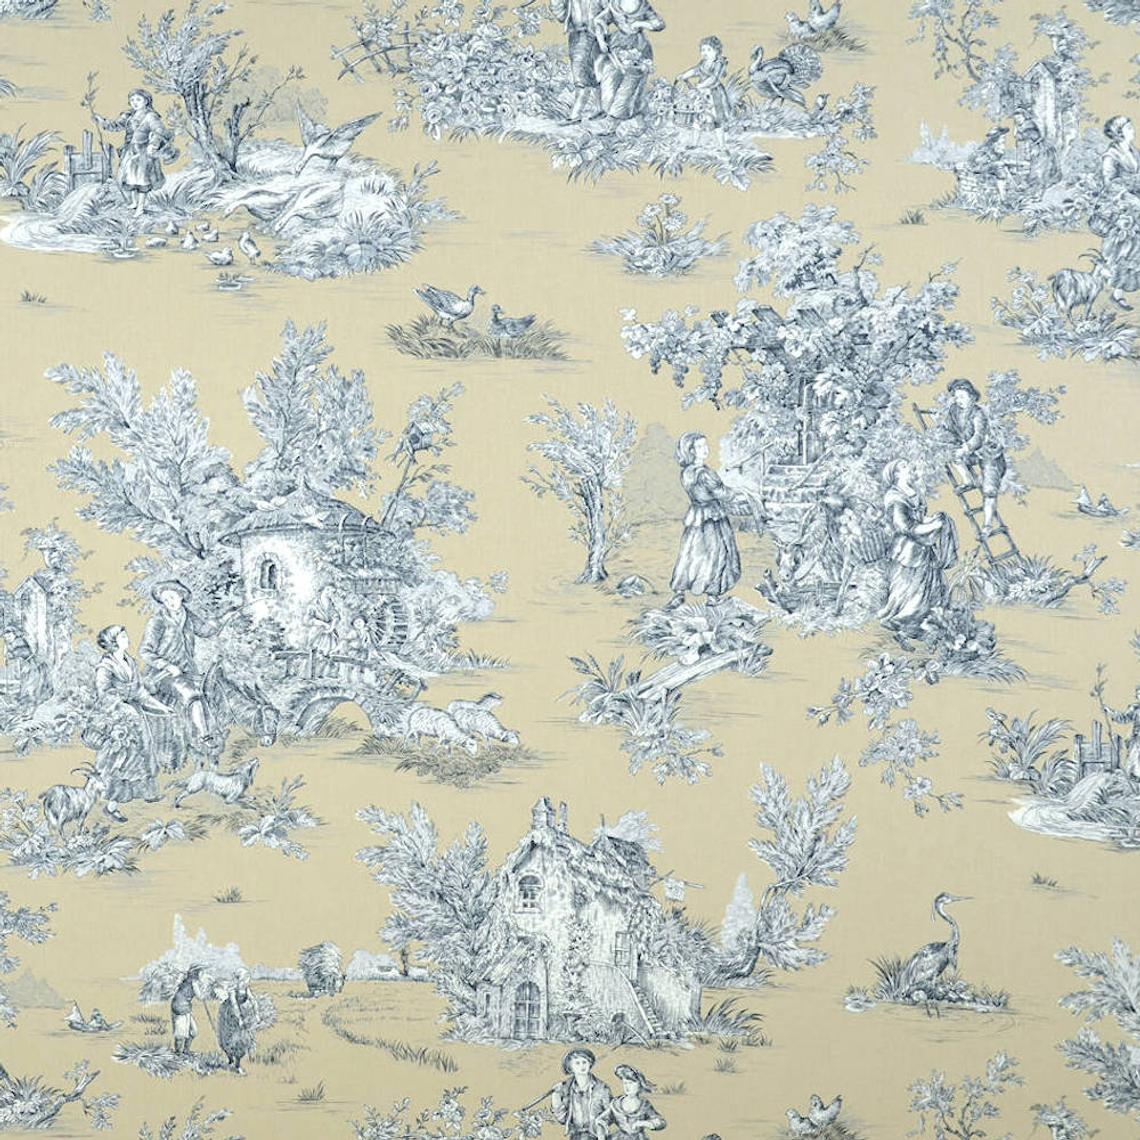 round tablecloth in pastorale #88 blue on beige french country toile